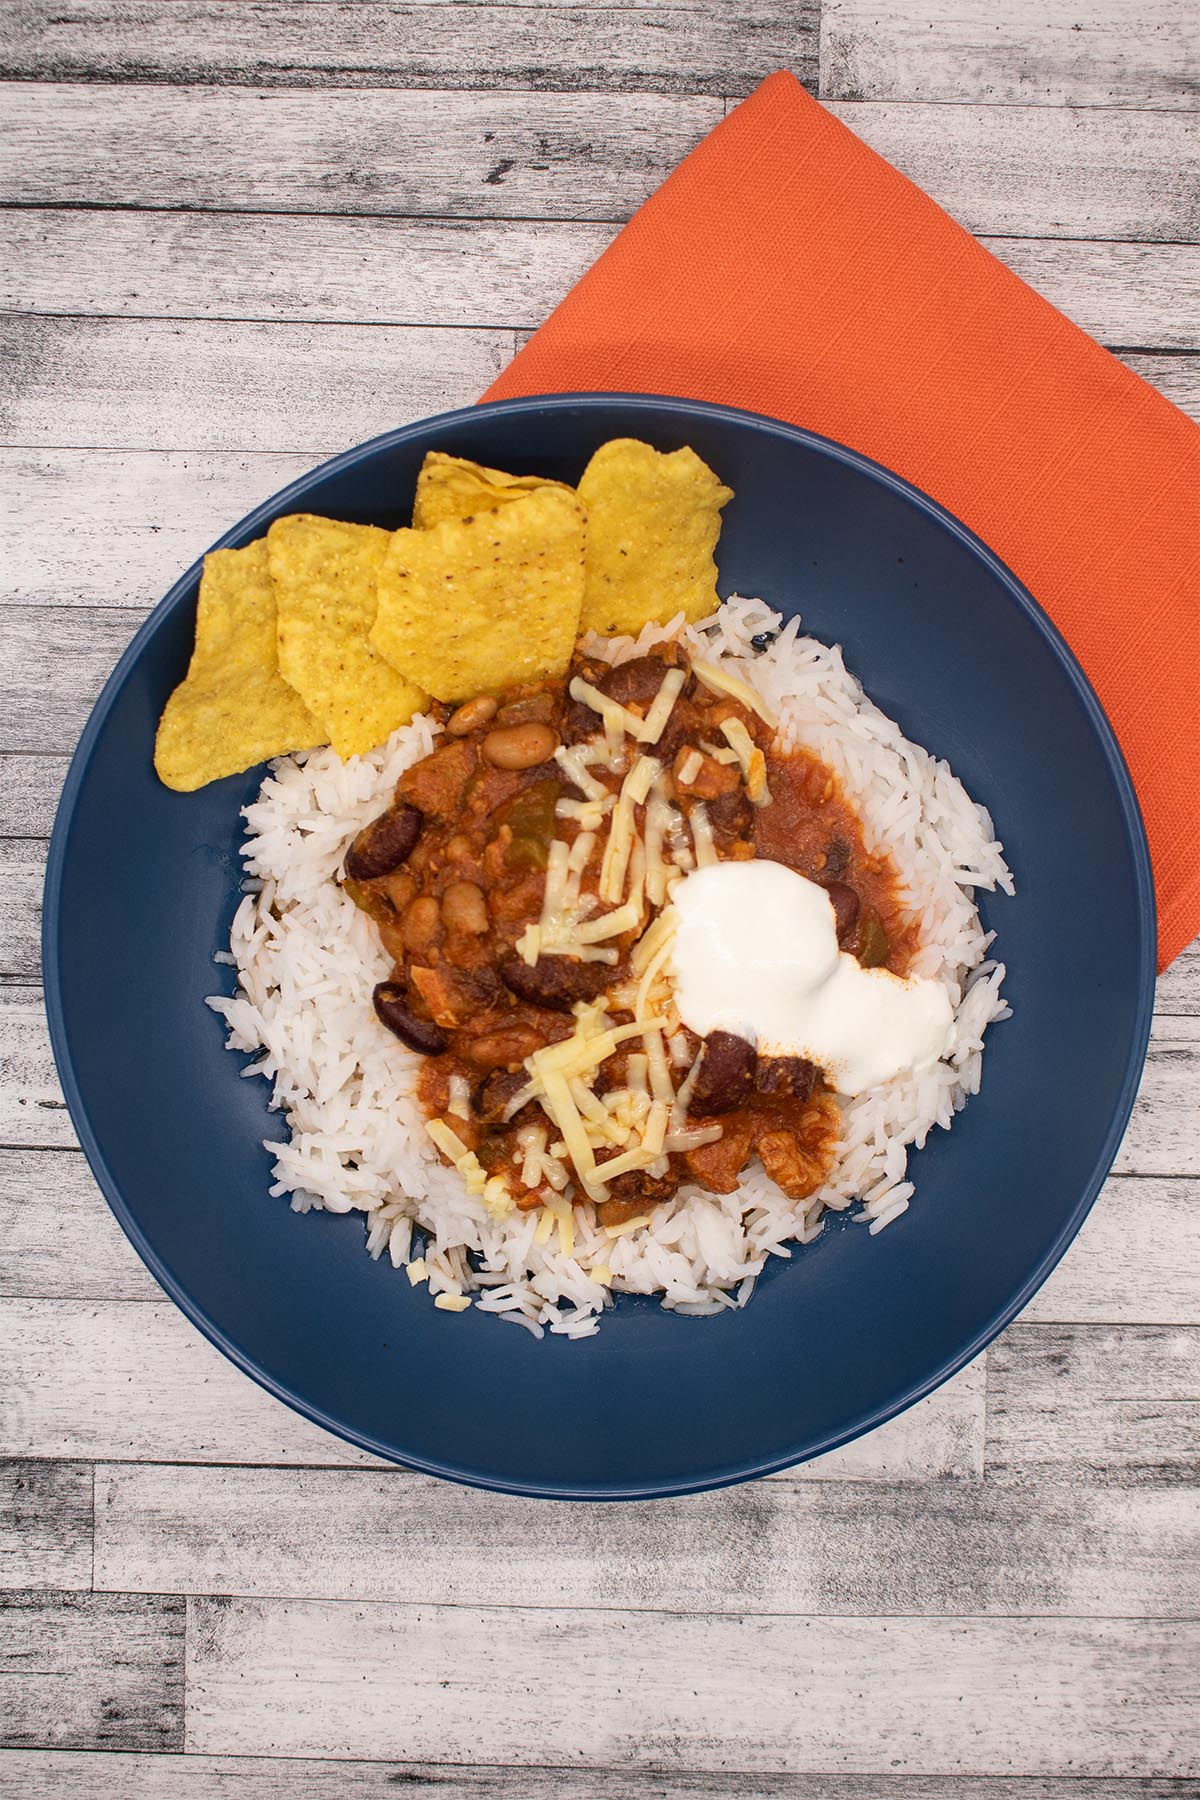 smoky pork and beans in a blue bowl with rice, nachos and soured cream next to orange napkin